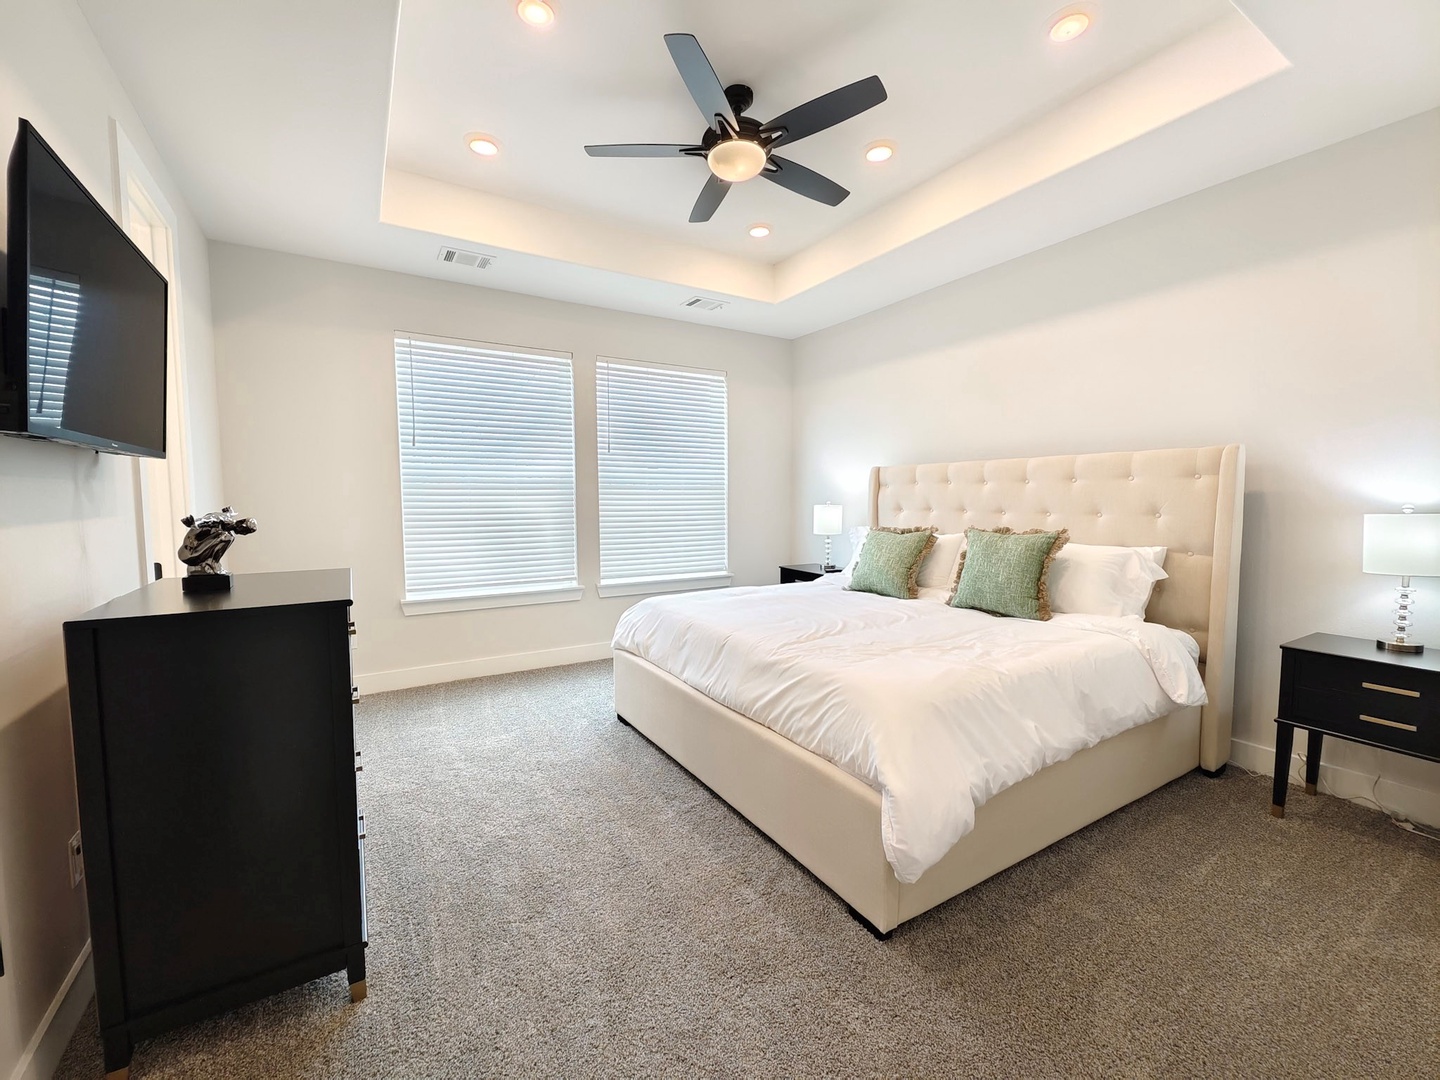 The 3rd-floor king suite boasts a grand ensuite, large closet, & Smart TV